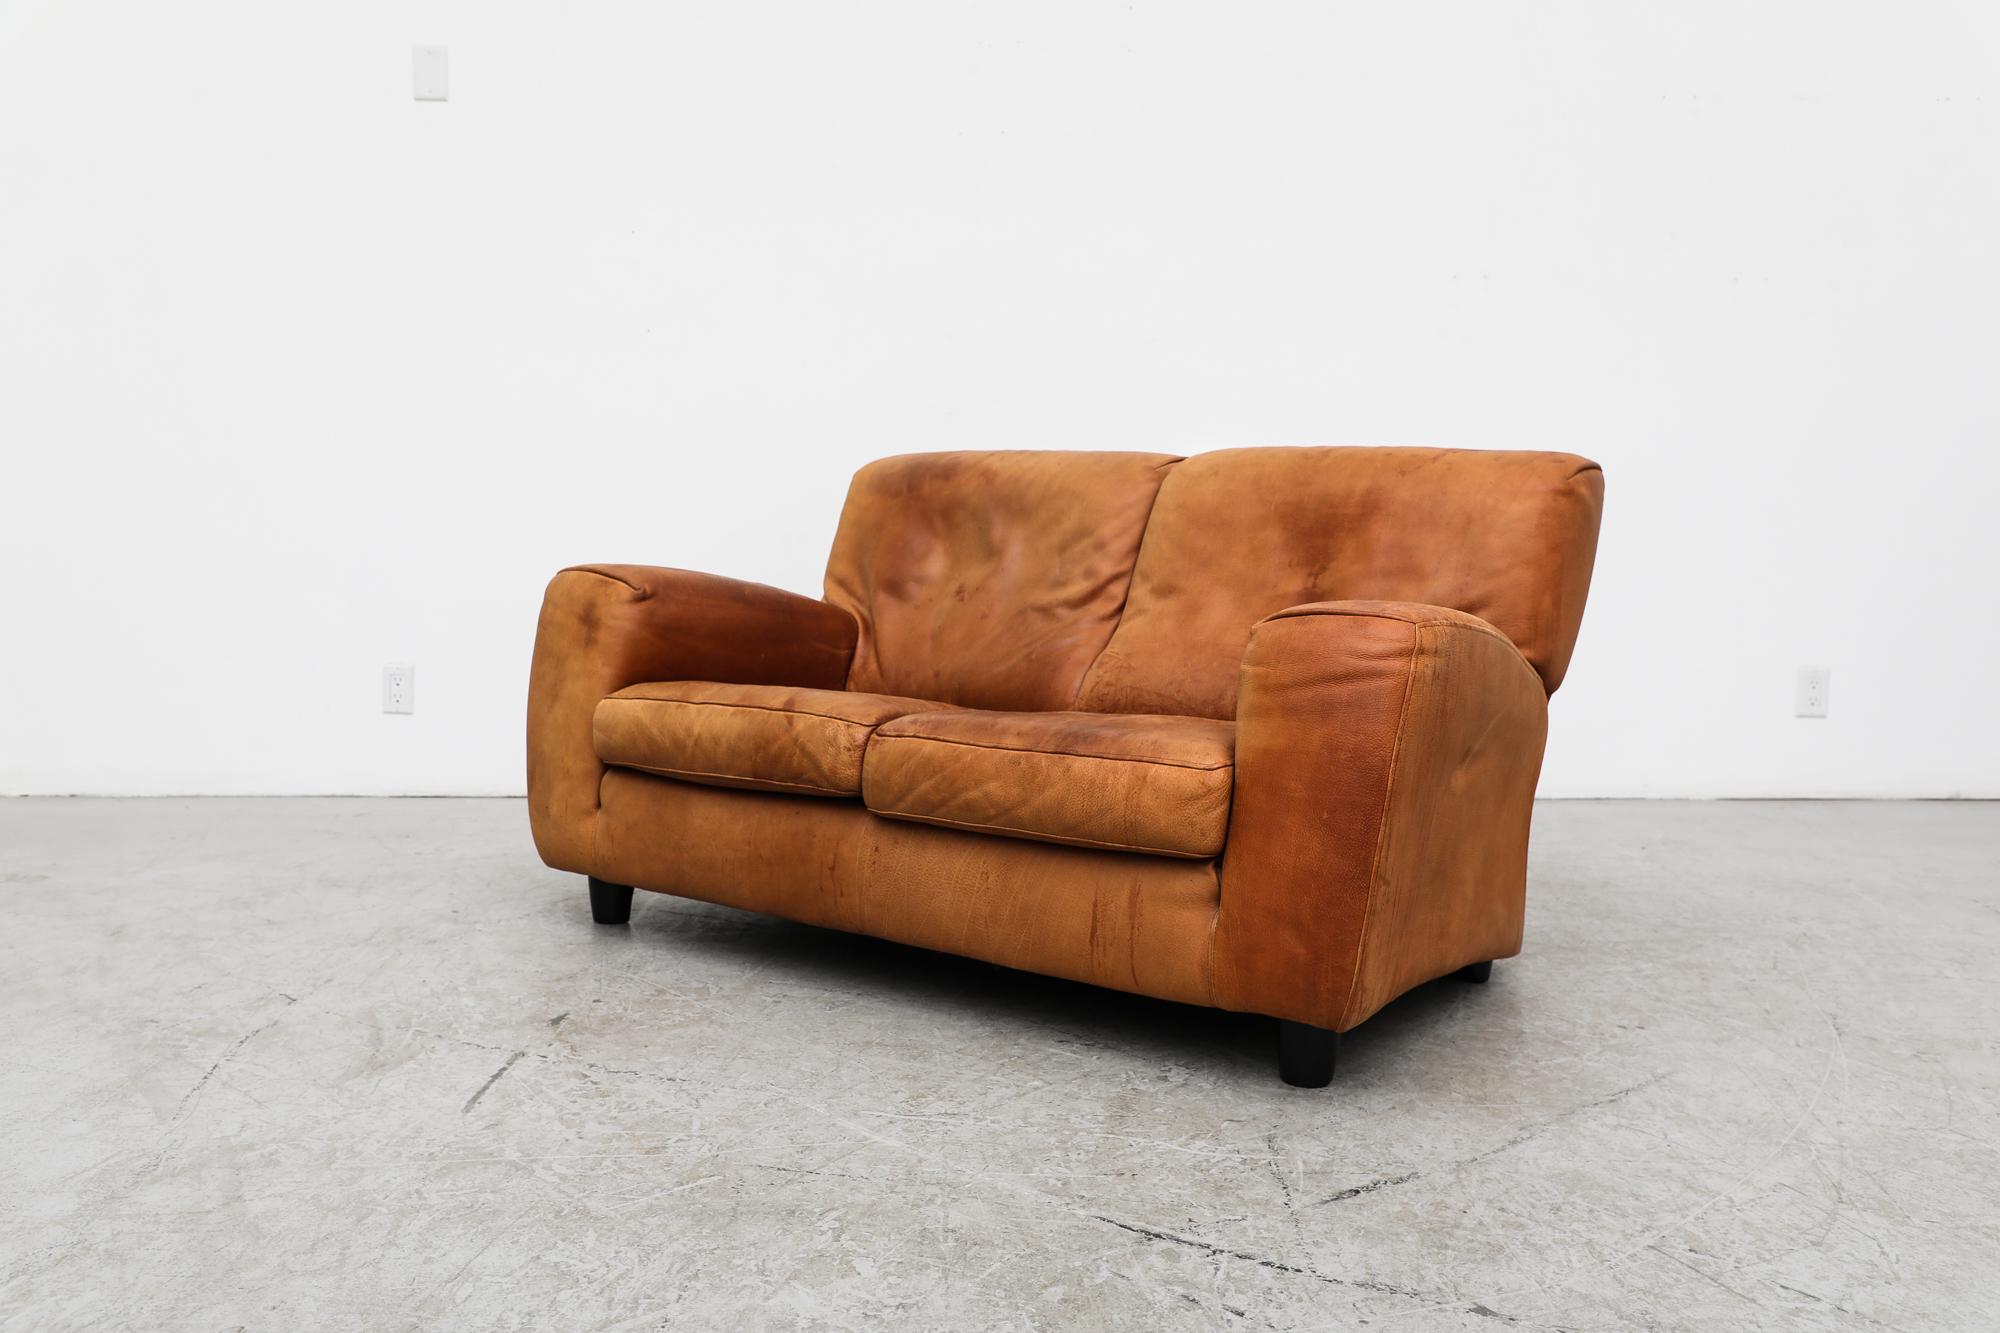 Italian Molinari ‘Fatboy’ two-seat sofa in cognac leather. In original condition with visible wear and heavy patina, including sun faded leather on the back right side. Wear is consistent with its age and use.